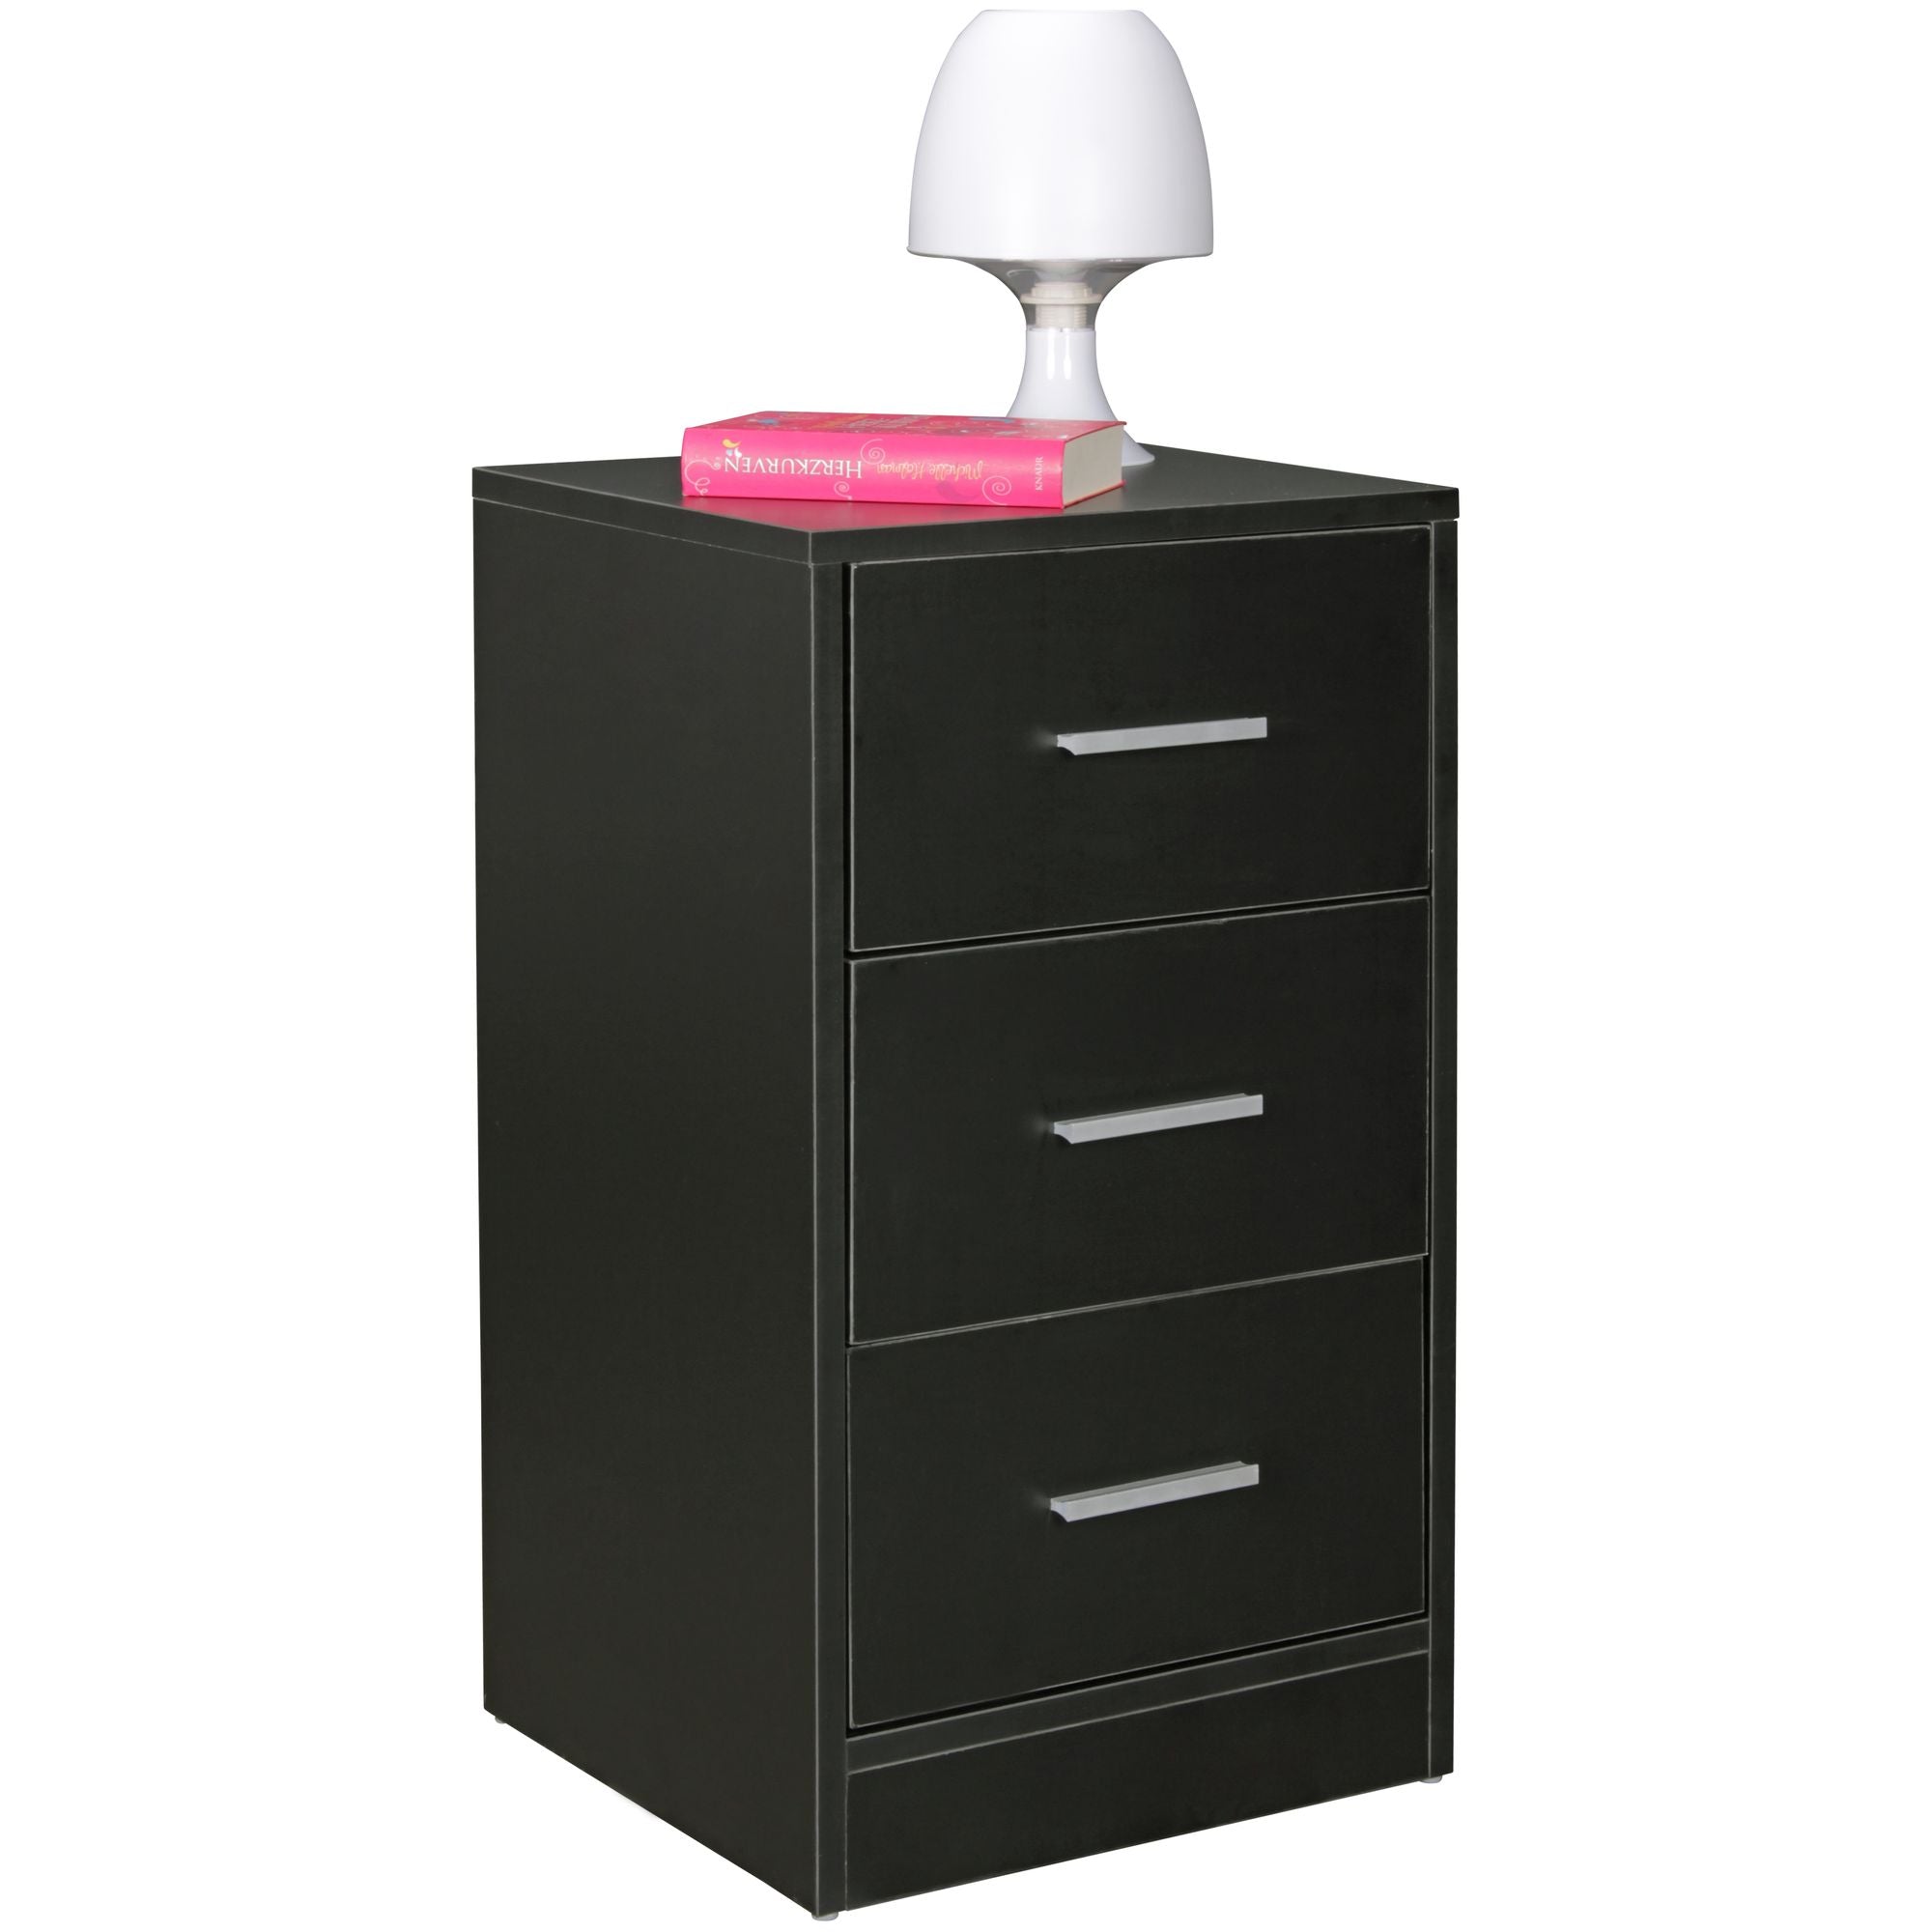 Second chance Wohnling FOGGIA Bedside table Black - Wooden chest of drawers